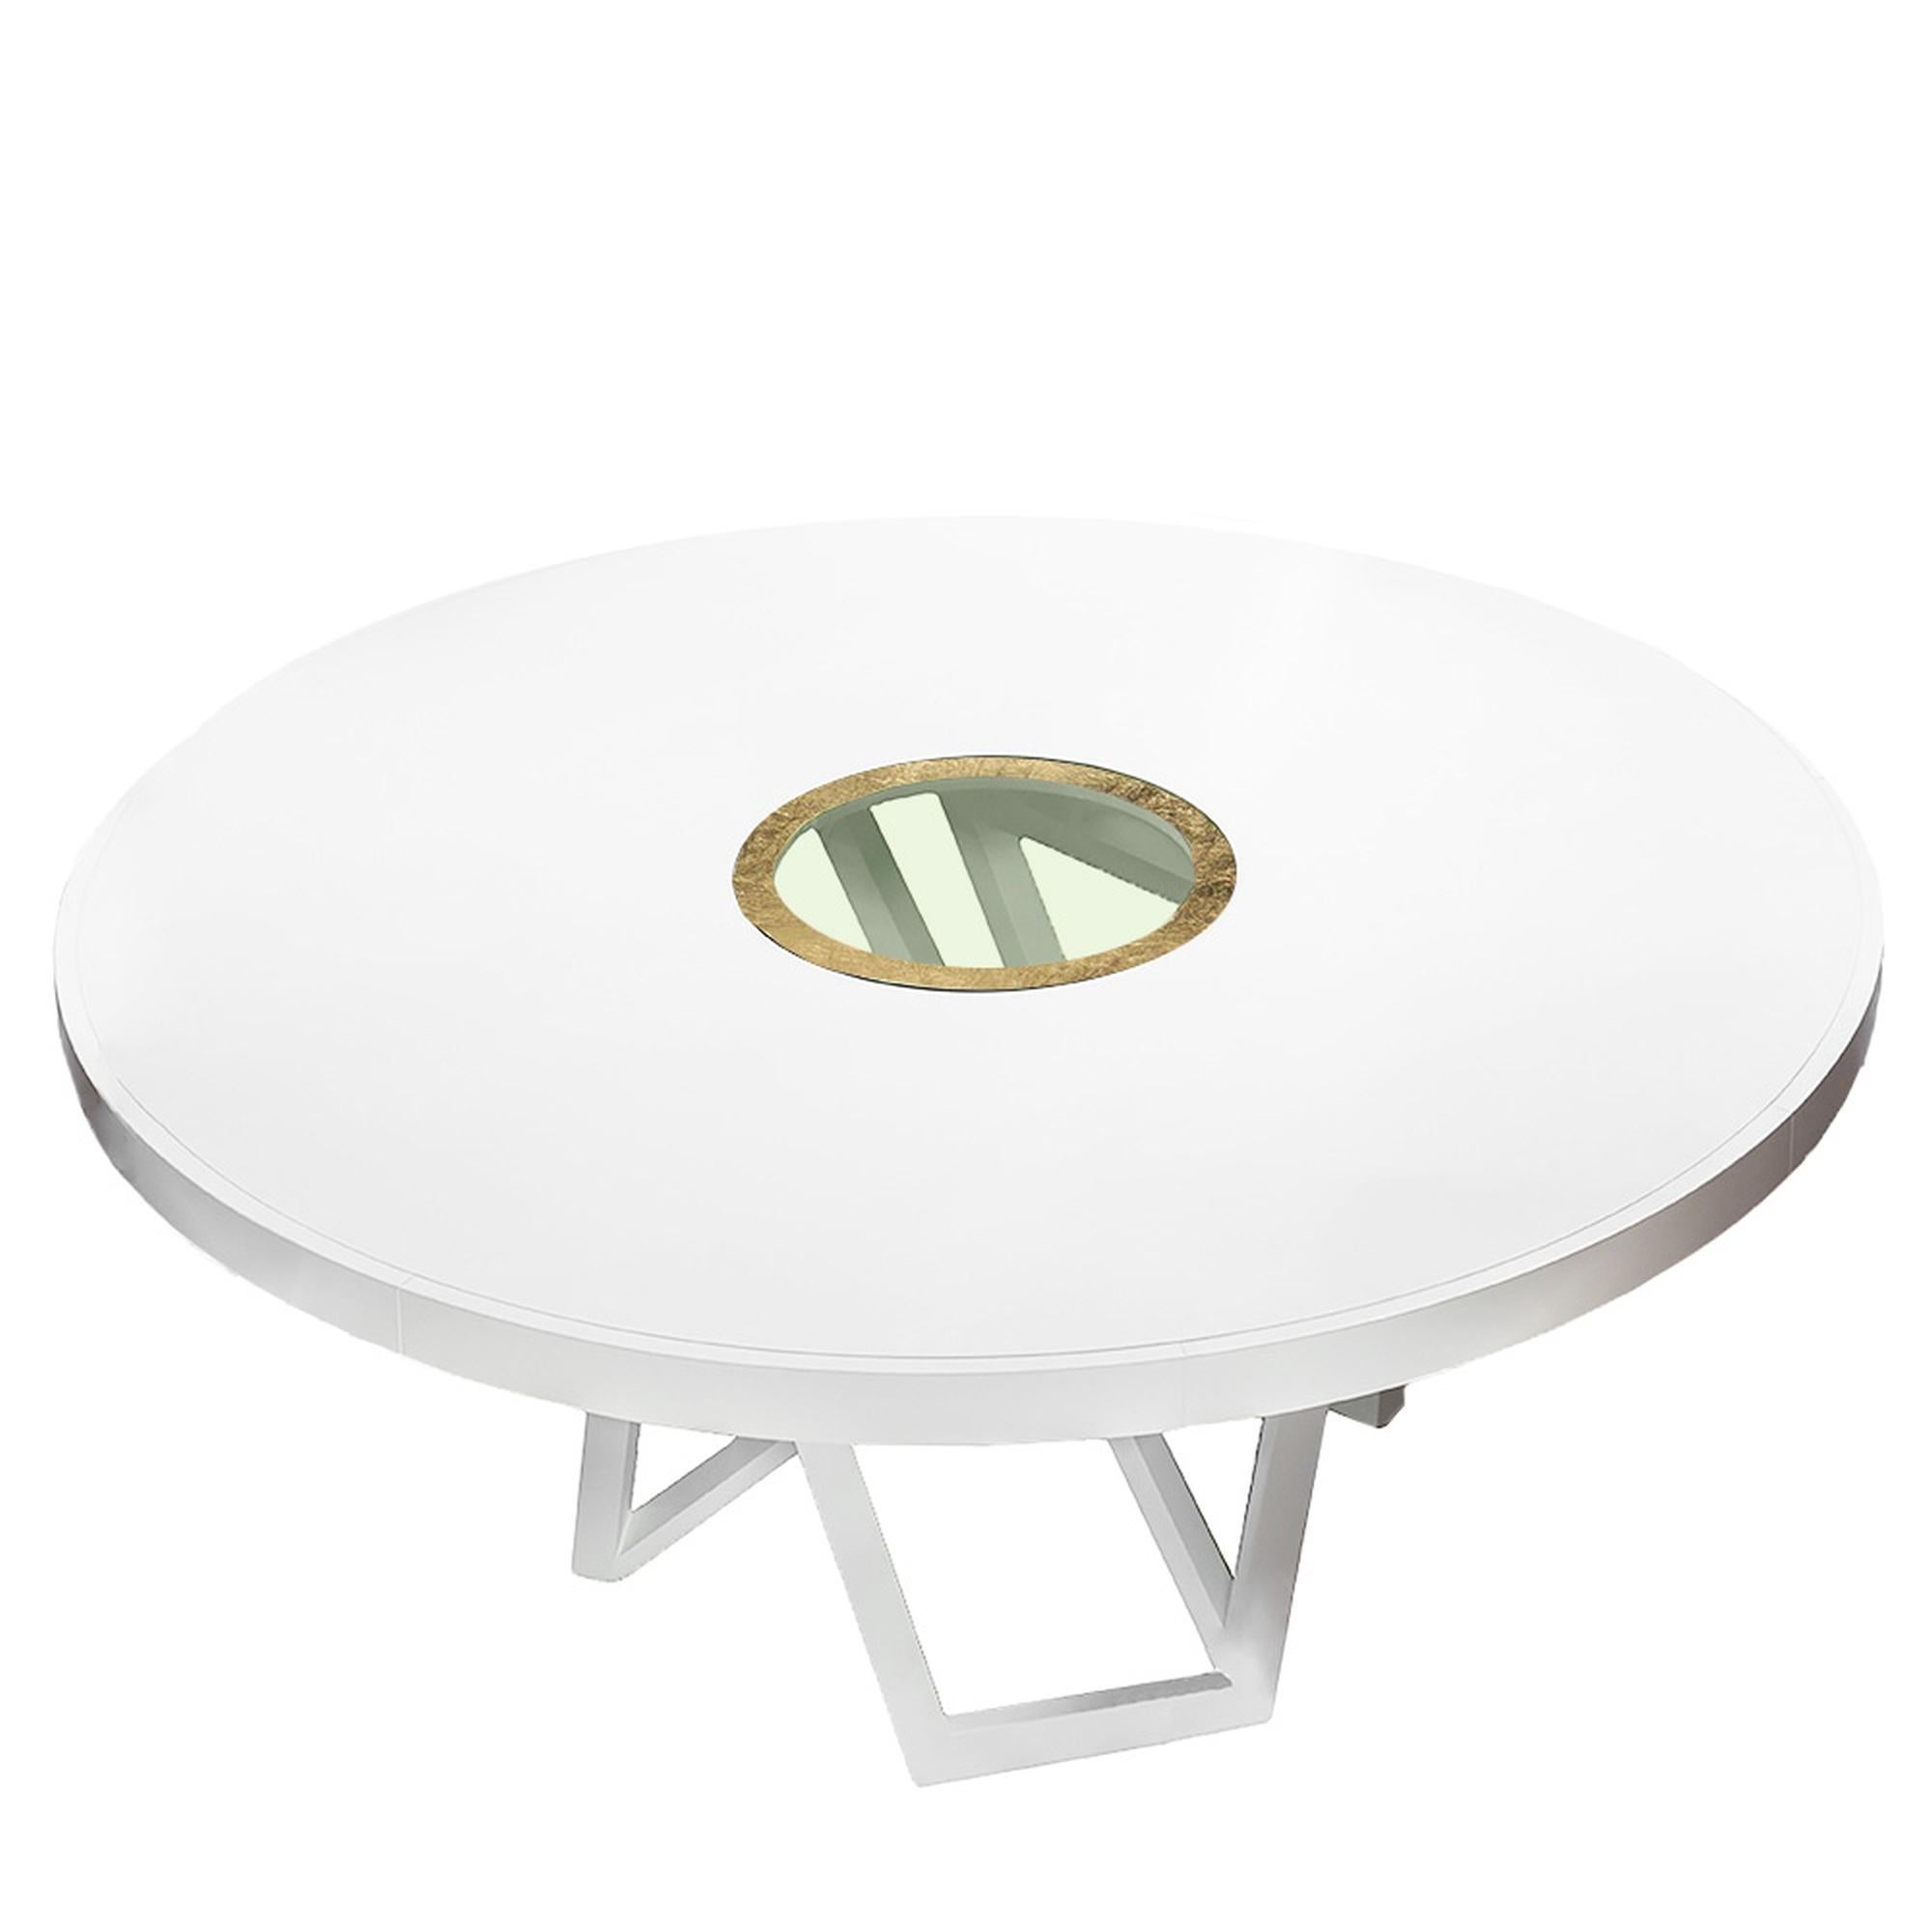 The Balboa dining table is a sleek and substantial gathering piece. A clear, tempered glass centrepiece with a hand gilded metallic border gives a stunning visual effect into the carefully designed intertwined base. Comfortably accommodates six